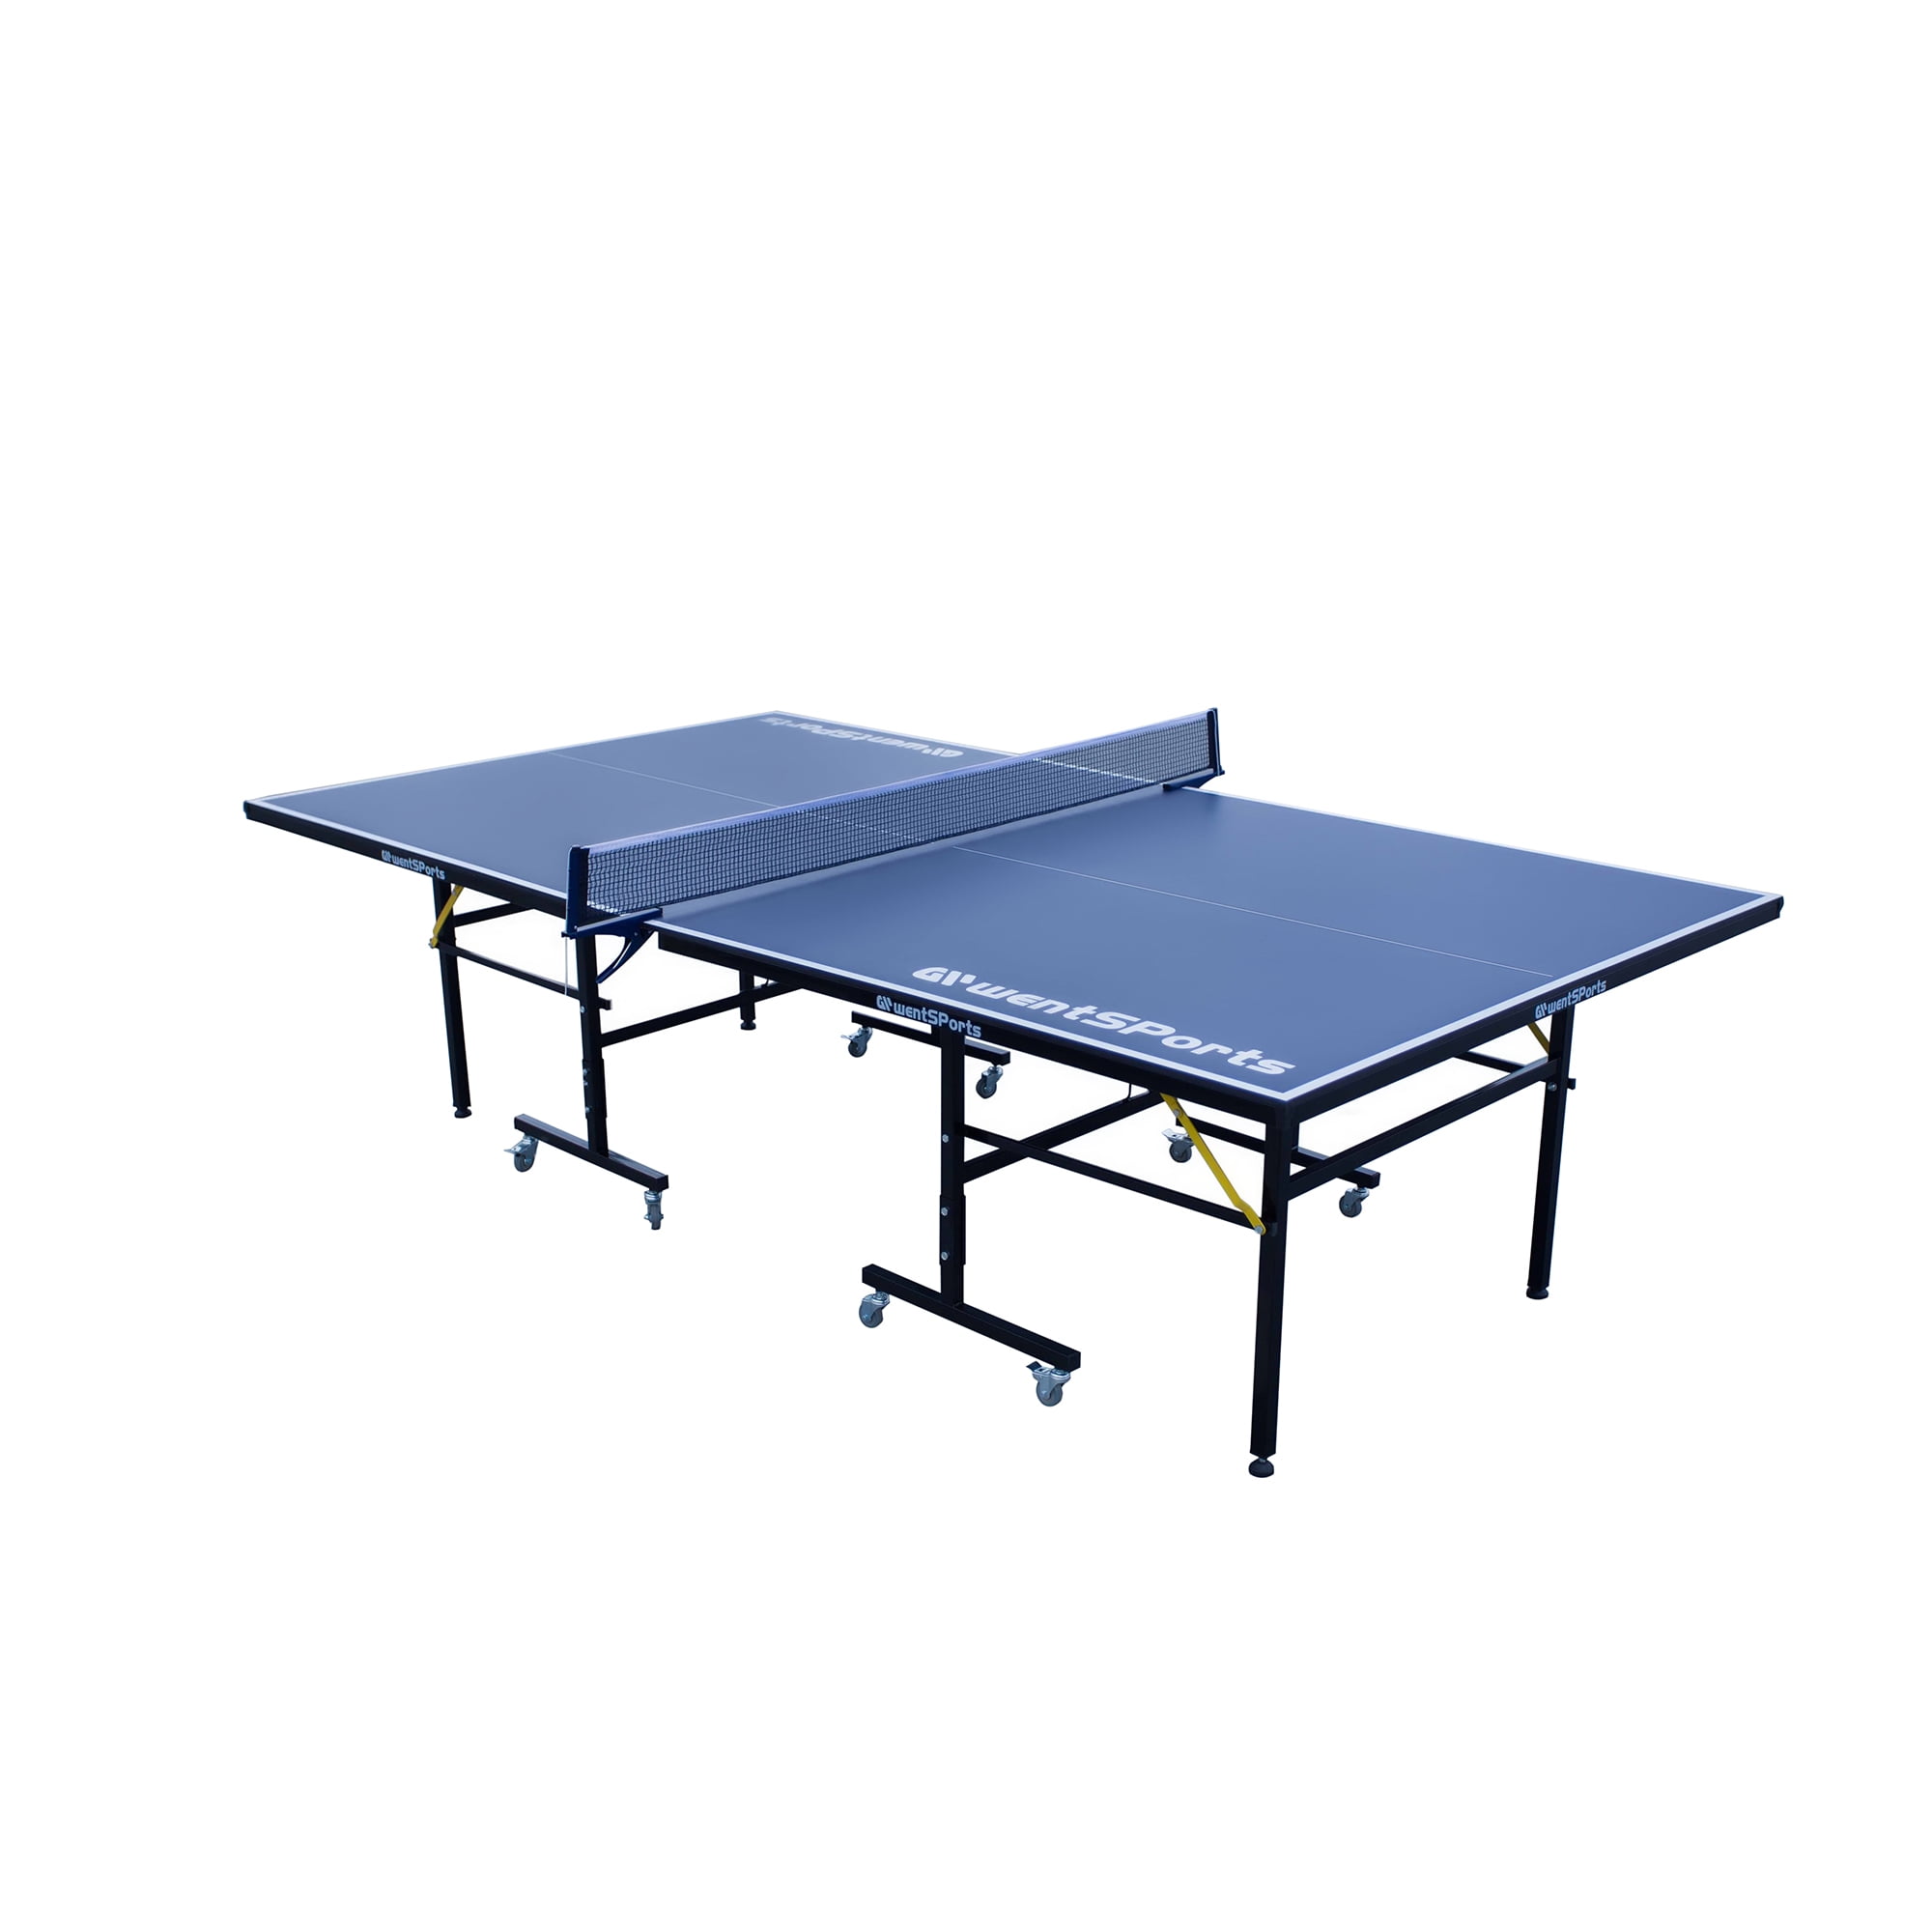 Koopje bed Korting Promotion！Tennis Tables Ping-Pong Table Professional Table Tennis Tables  Advantage Competition-Ready Table Tennis Table - Walmart.com